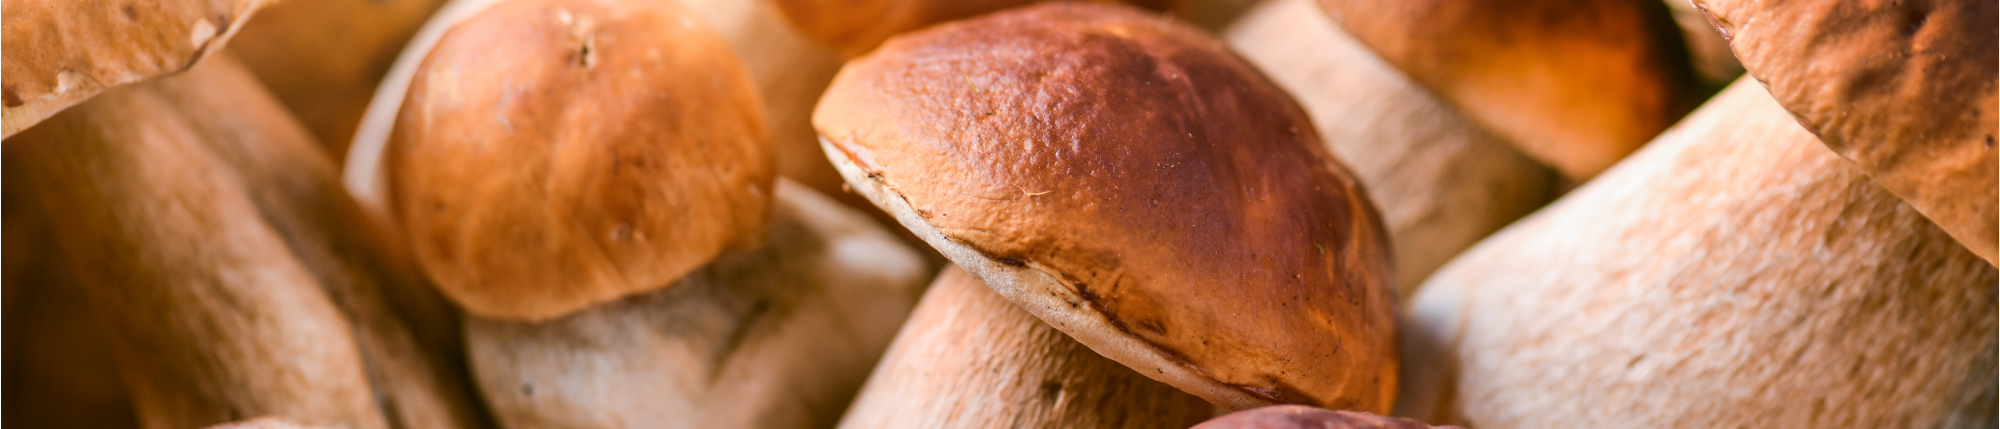 Porcini Mushrooms: buy now at the best price on ParmaShop